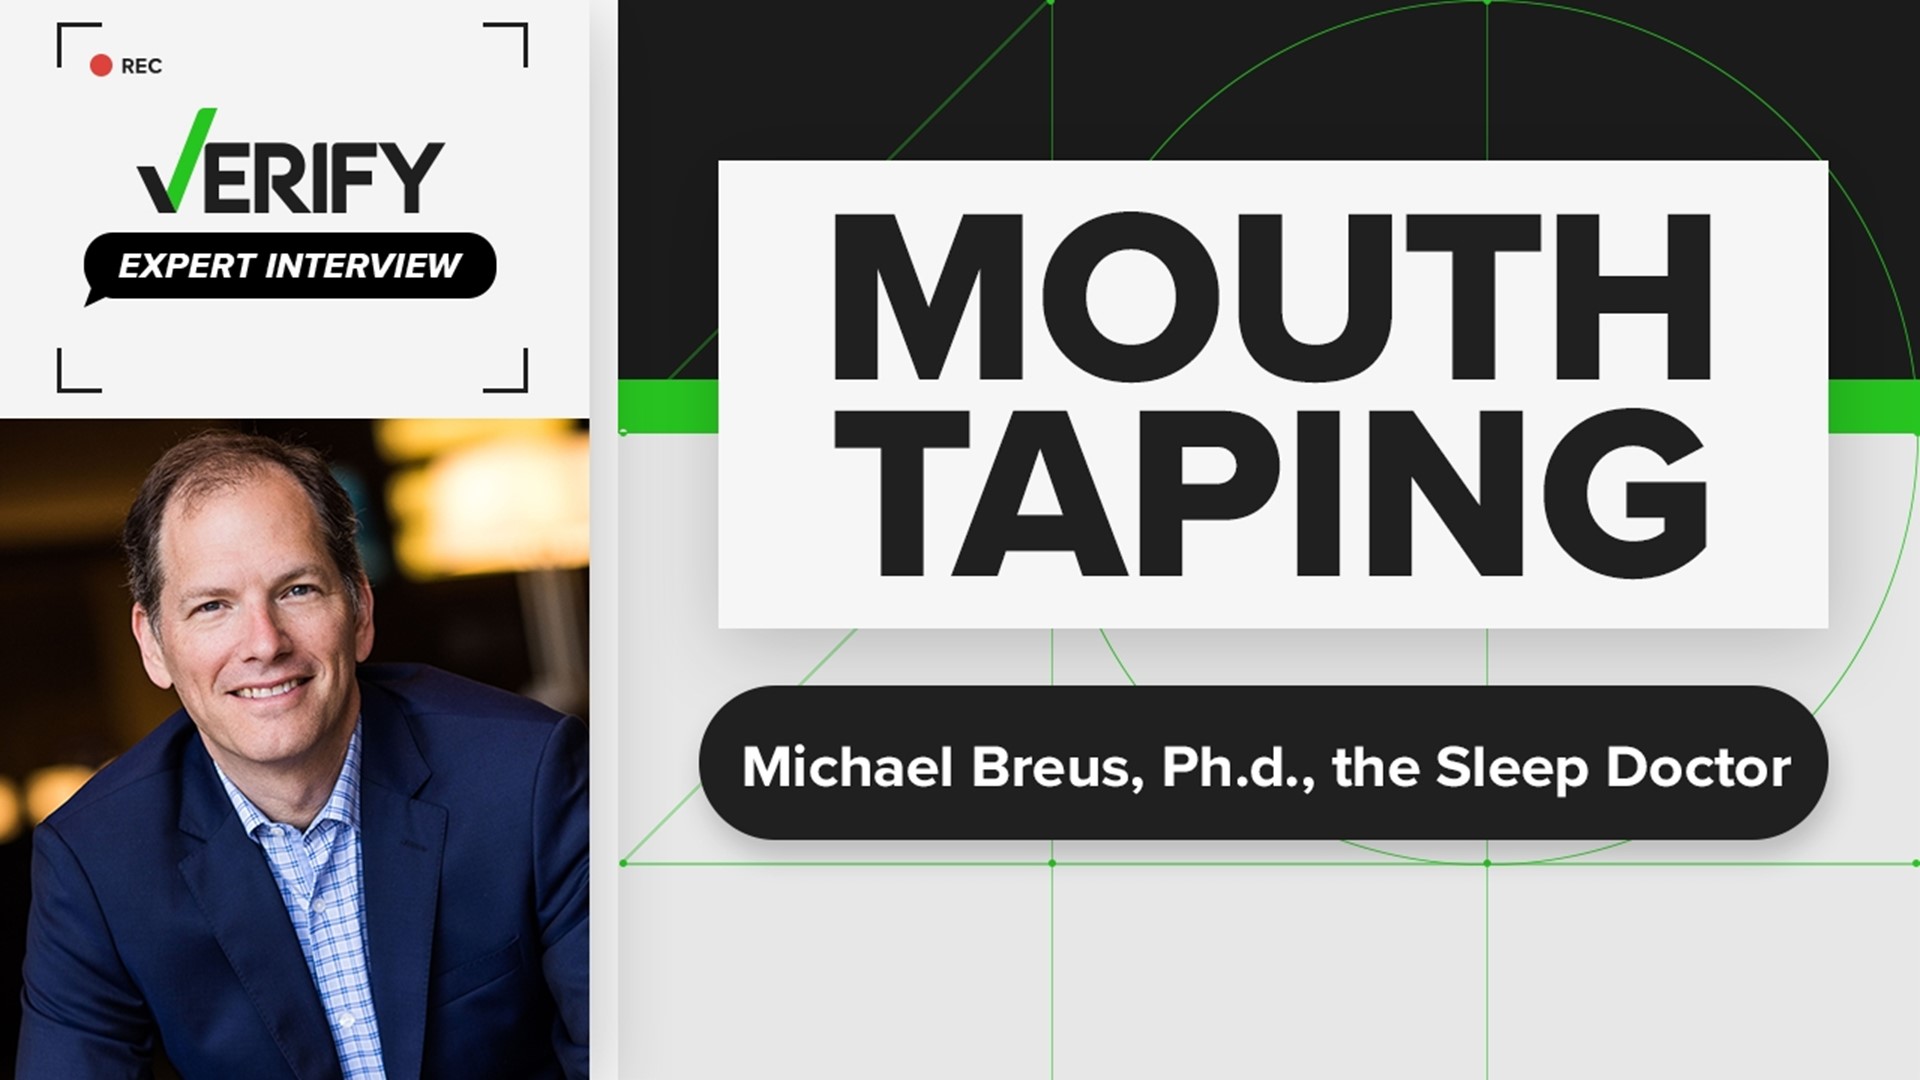 Michael Breus, Ph.d. is a clinical psychologist and explains how vertically taping your mouth when you sleep can be beneficial to oral care.